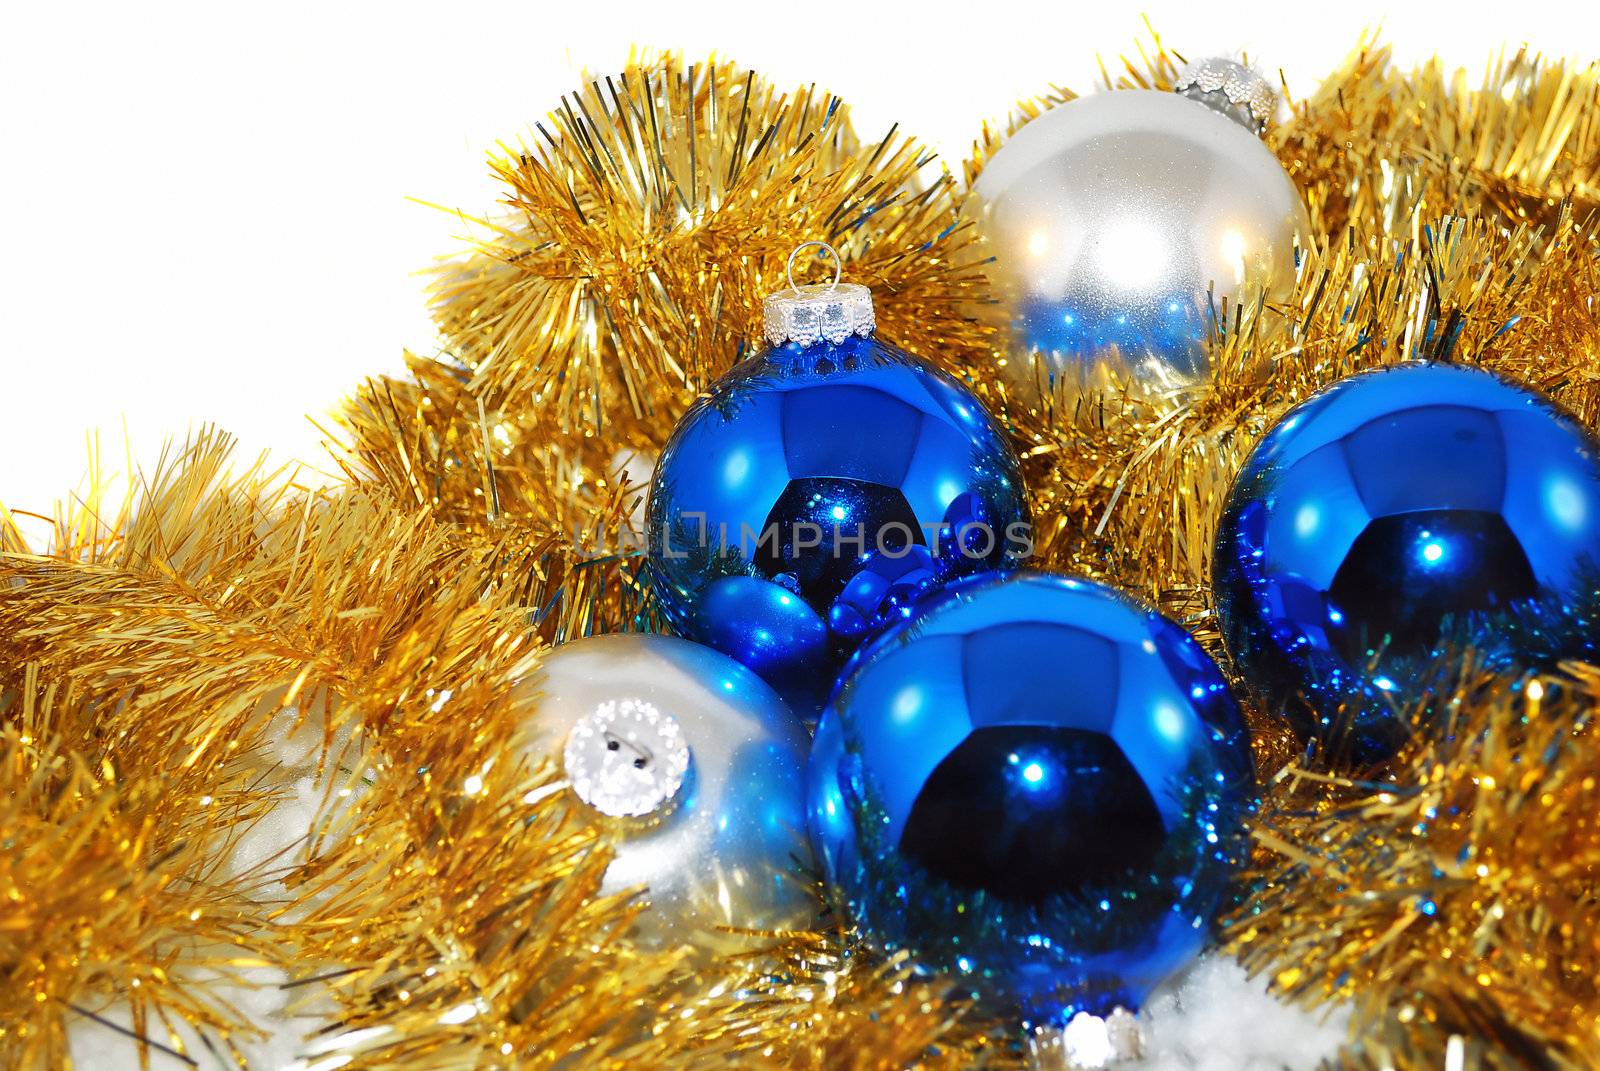 Big blue and metallic ball are on the gold ornament.